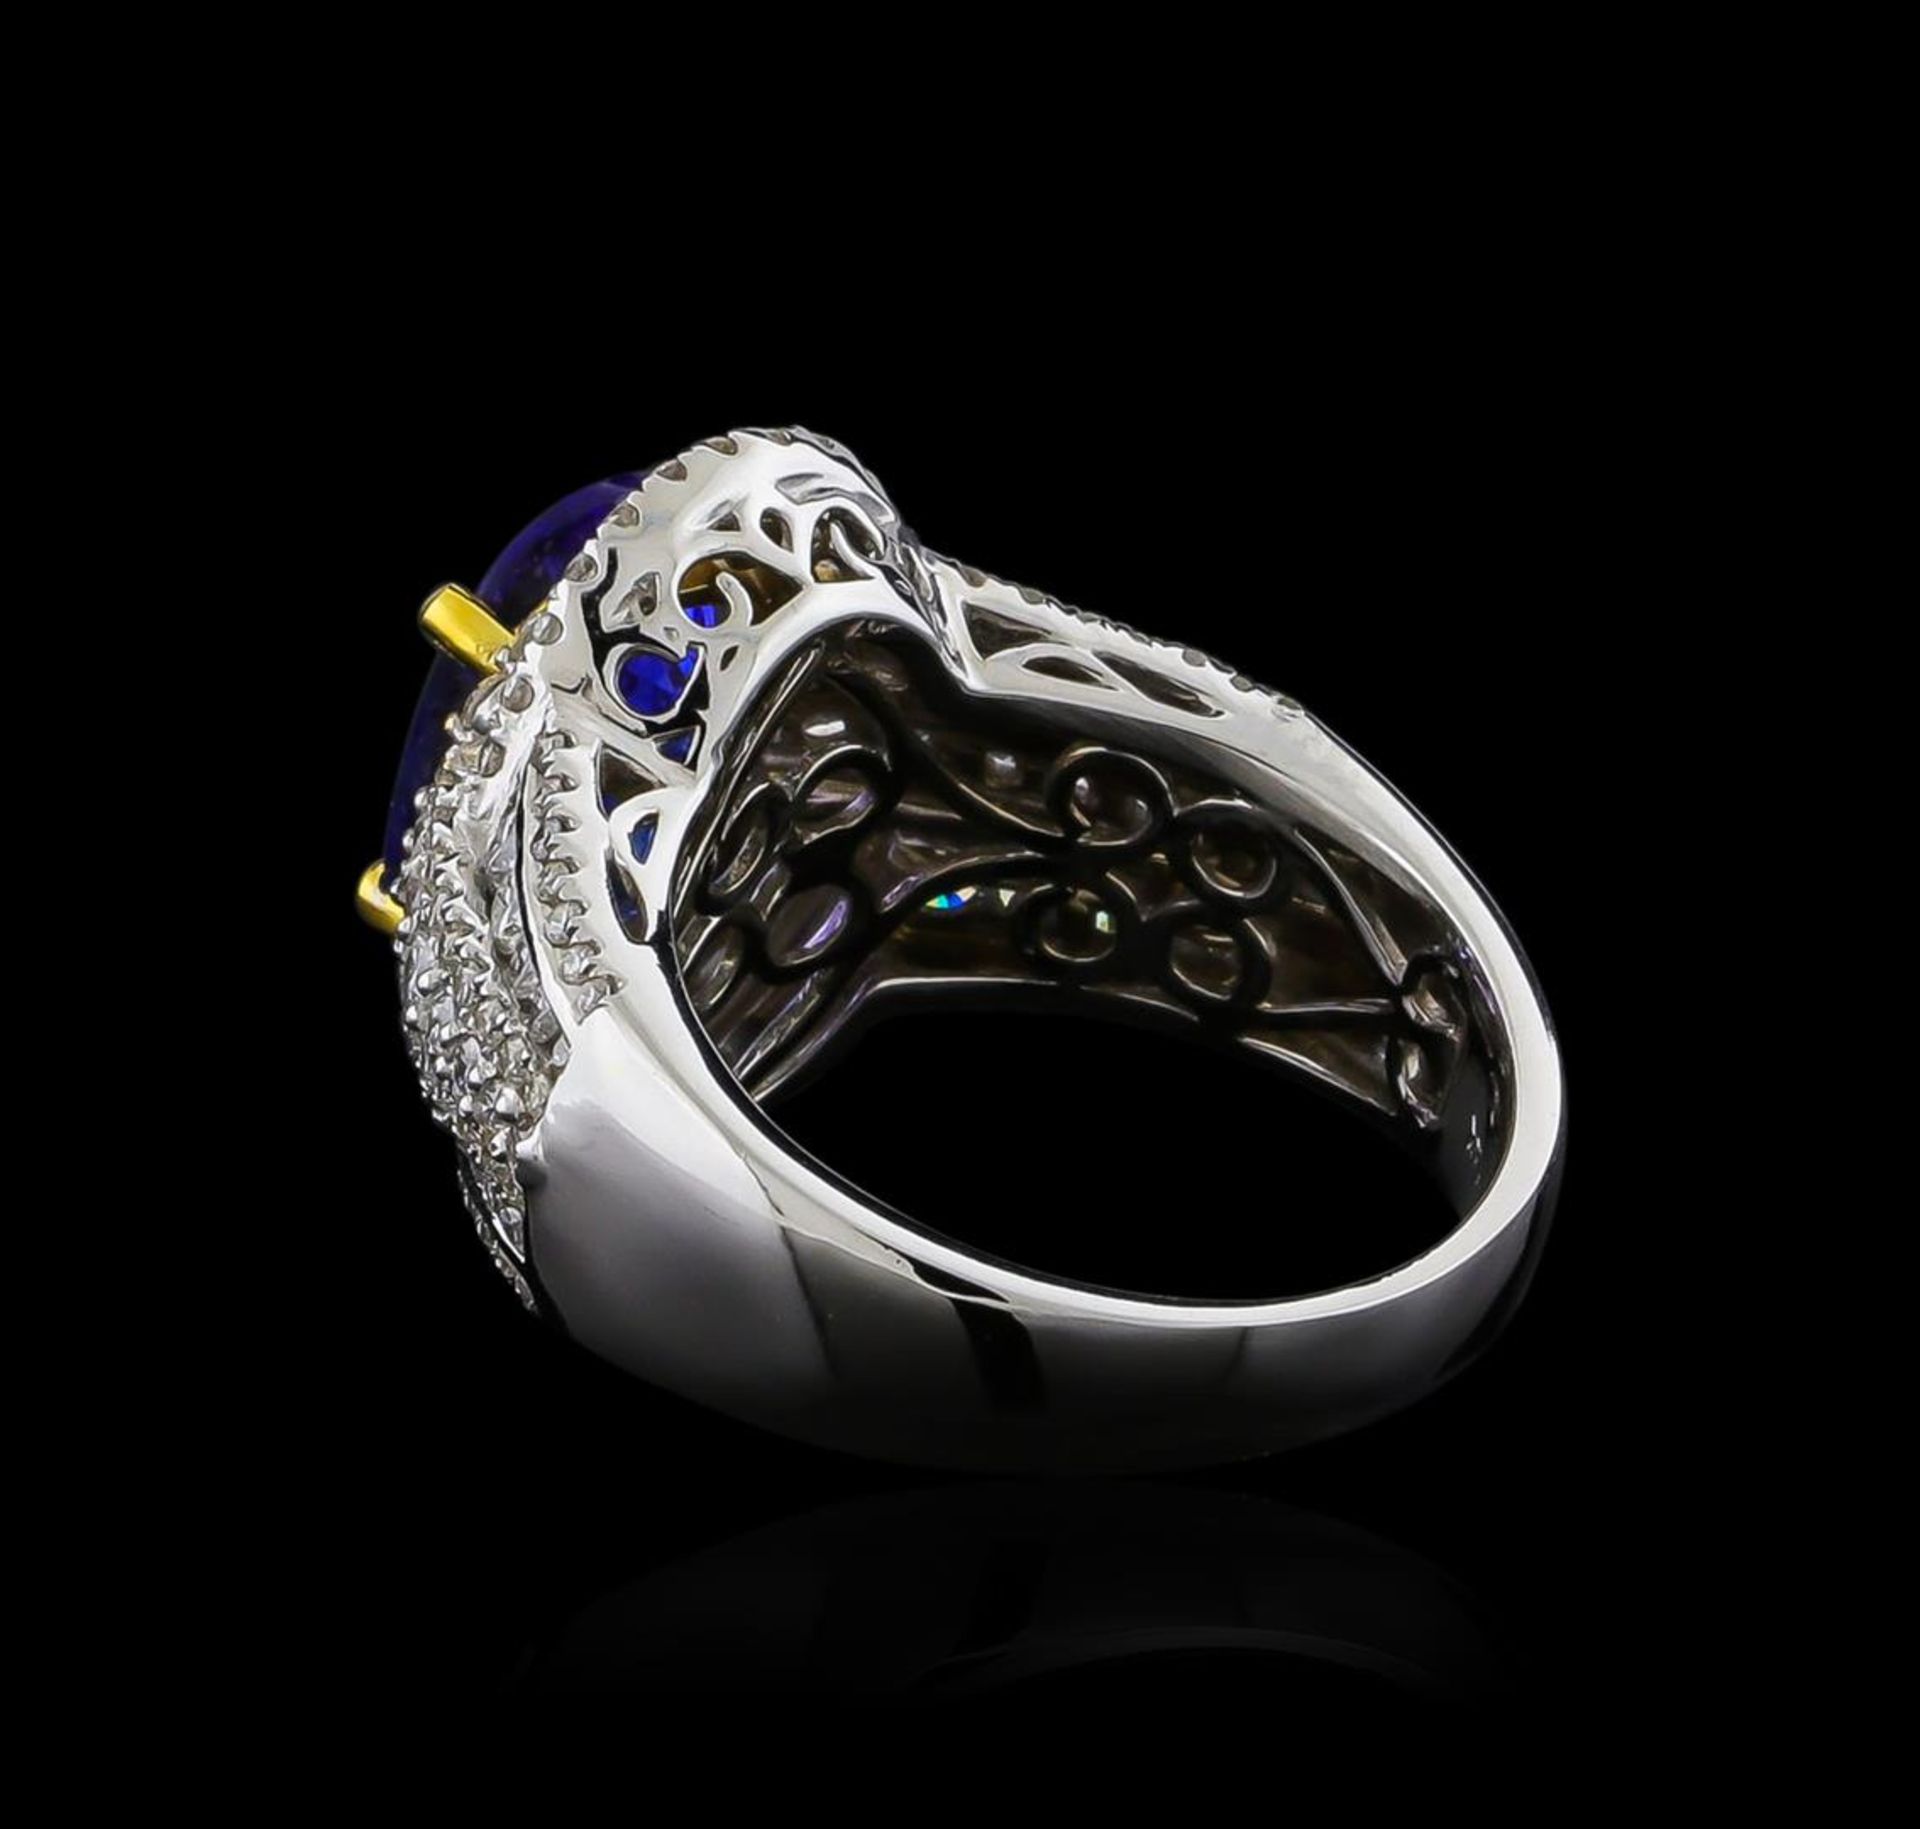 14KT Two-Tone Gold 4.12 ctw Tanzanite and Diamond Ring - Image 3 of 5